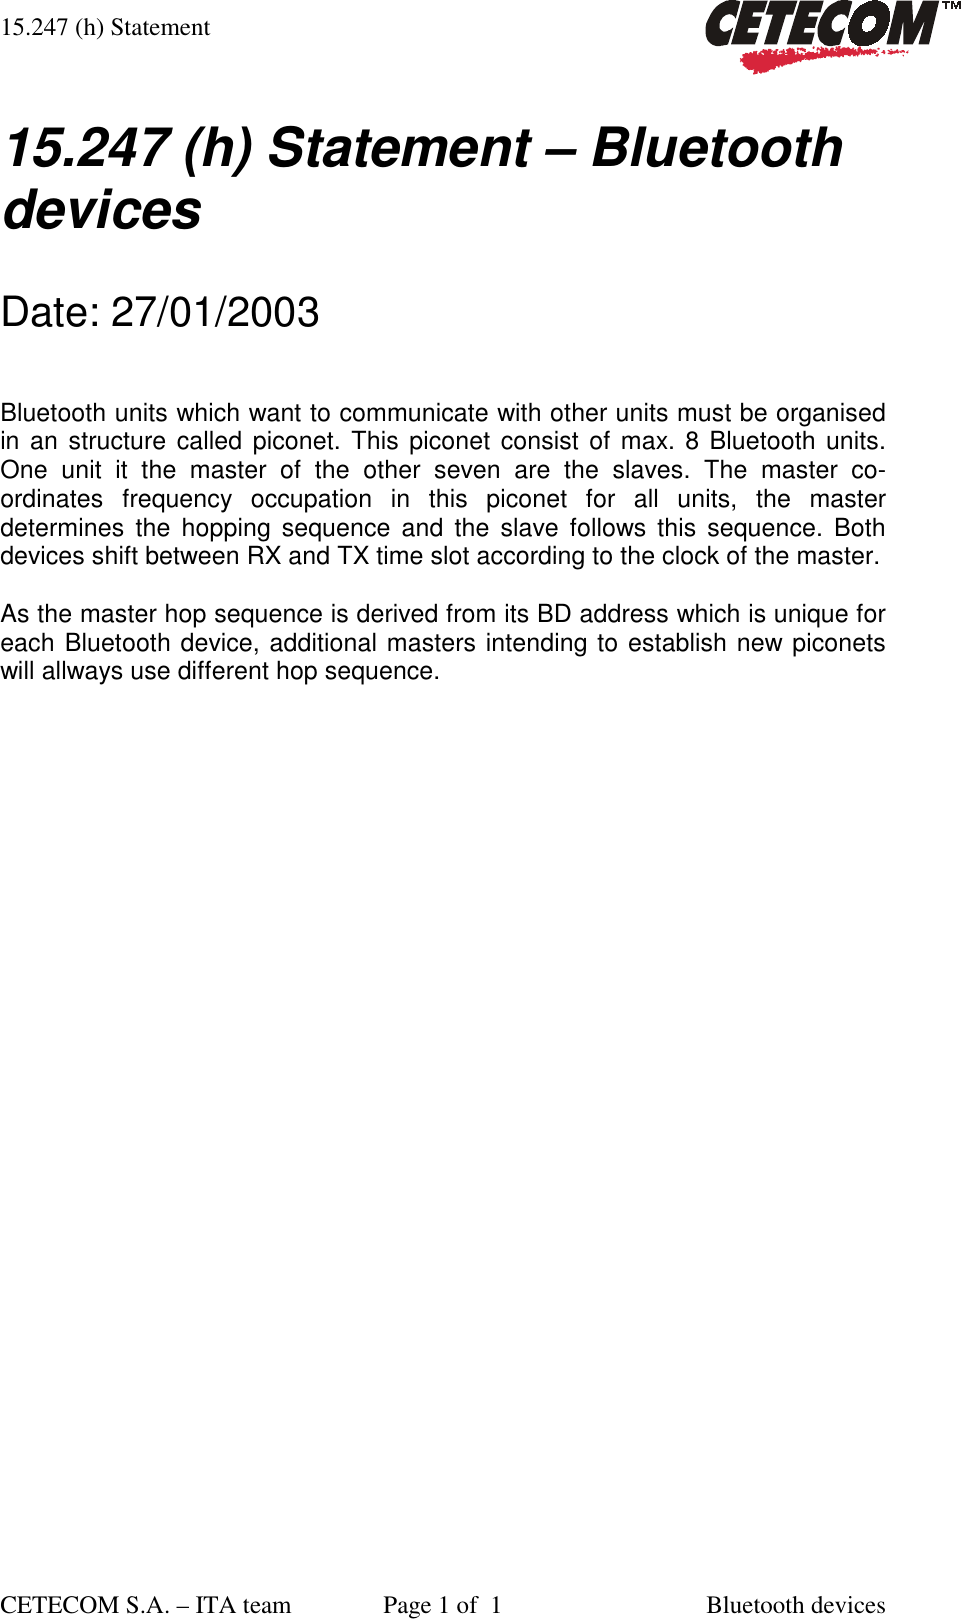 15.247 (h) Statement CETECOM S.A. – ITA team  Page 1 of  1  Bluetooth devices  15.247 (h) Statement – Bluetooth devices  Date: 27/01/2003  Bluetooth units which want to communicate with other units must be organised in an structure called piconet. This piconet consist of max. 8 Bluetooth units. One unit it the master of the other seven are the slaves. The master co-ordinates frequency occupation in this piconet for all units, the master determines the hopping sequence and the slave follows this sequence. Both devices shift between RX and TX time slot according to the clock of the master.  As the master hop sequence is derived from its BD address which is unique for each Bluetooth device, additional masters intending to establish new piconets will allways use different hop sequence. 